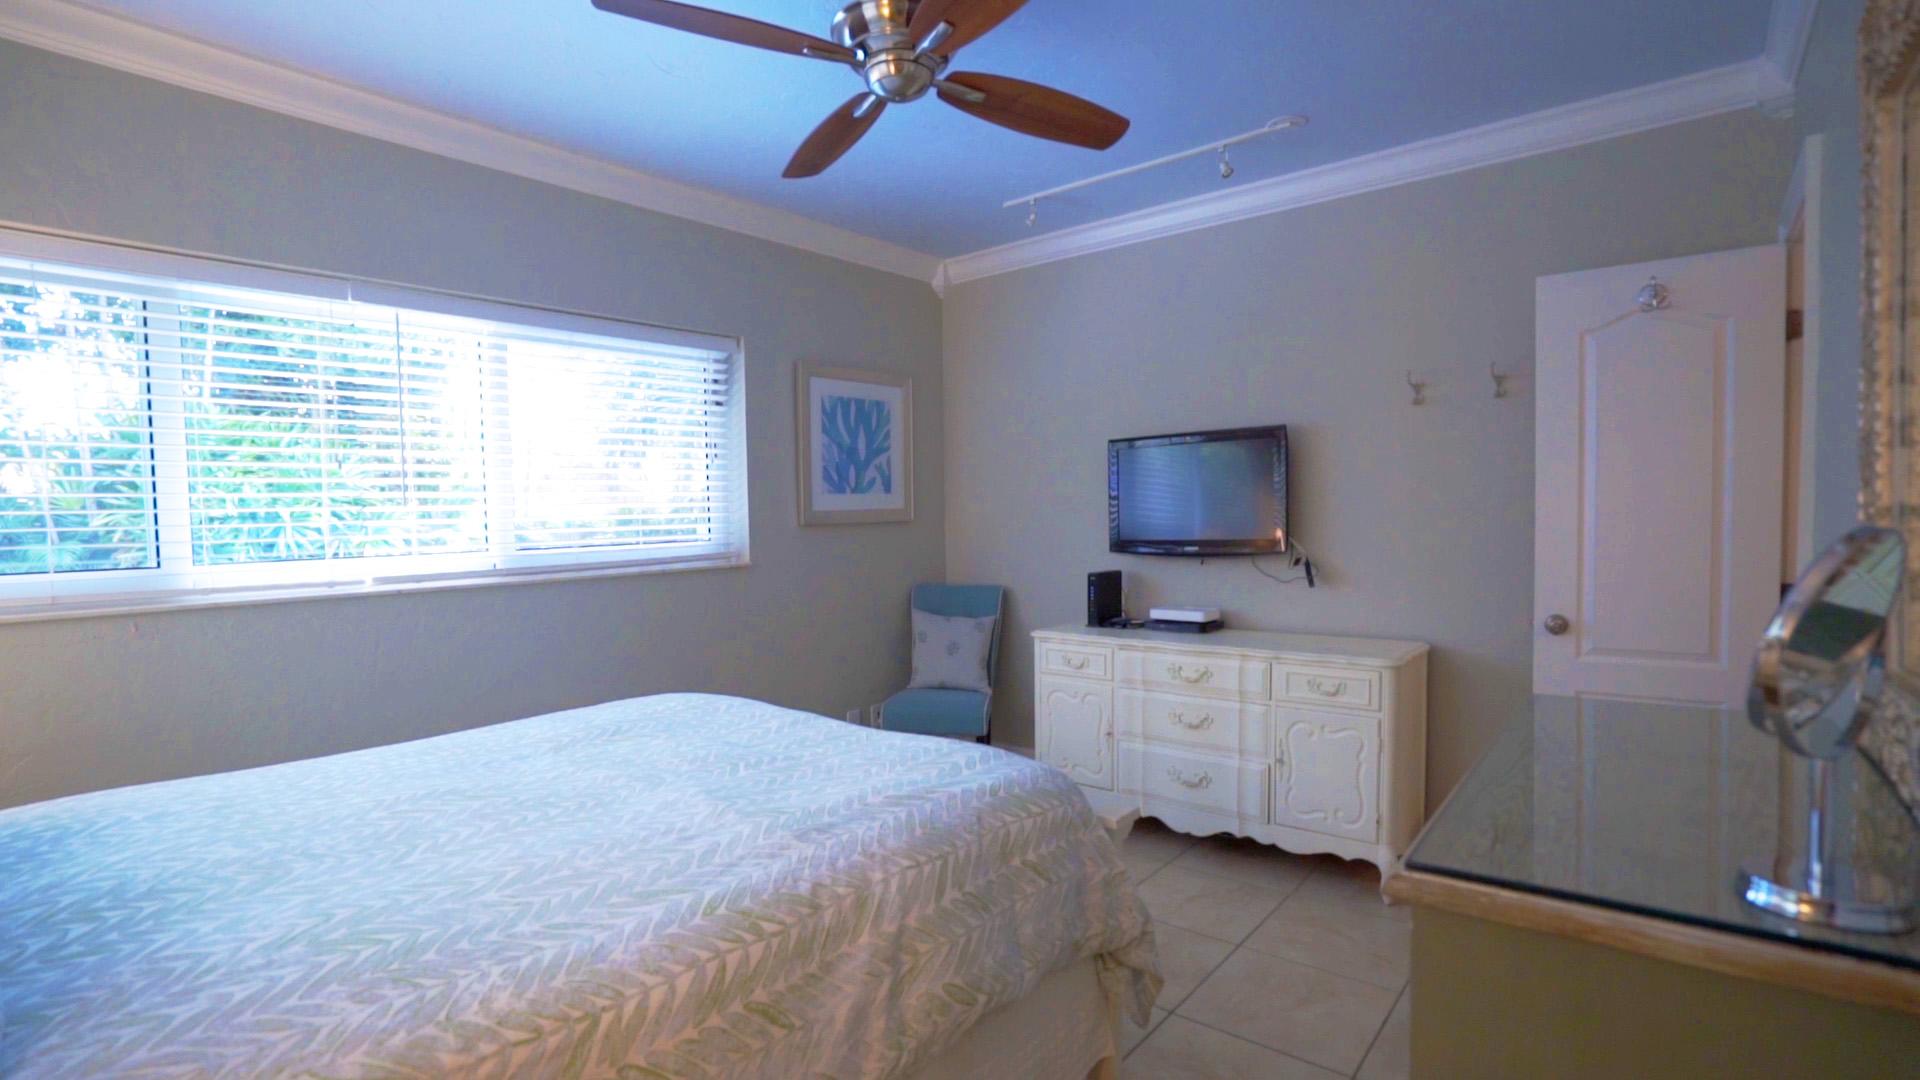 Vacation rental in Ft. Lauderdale Florida